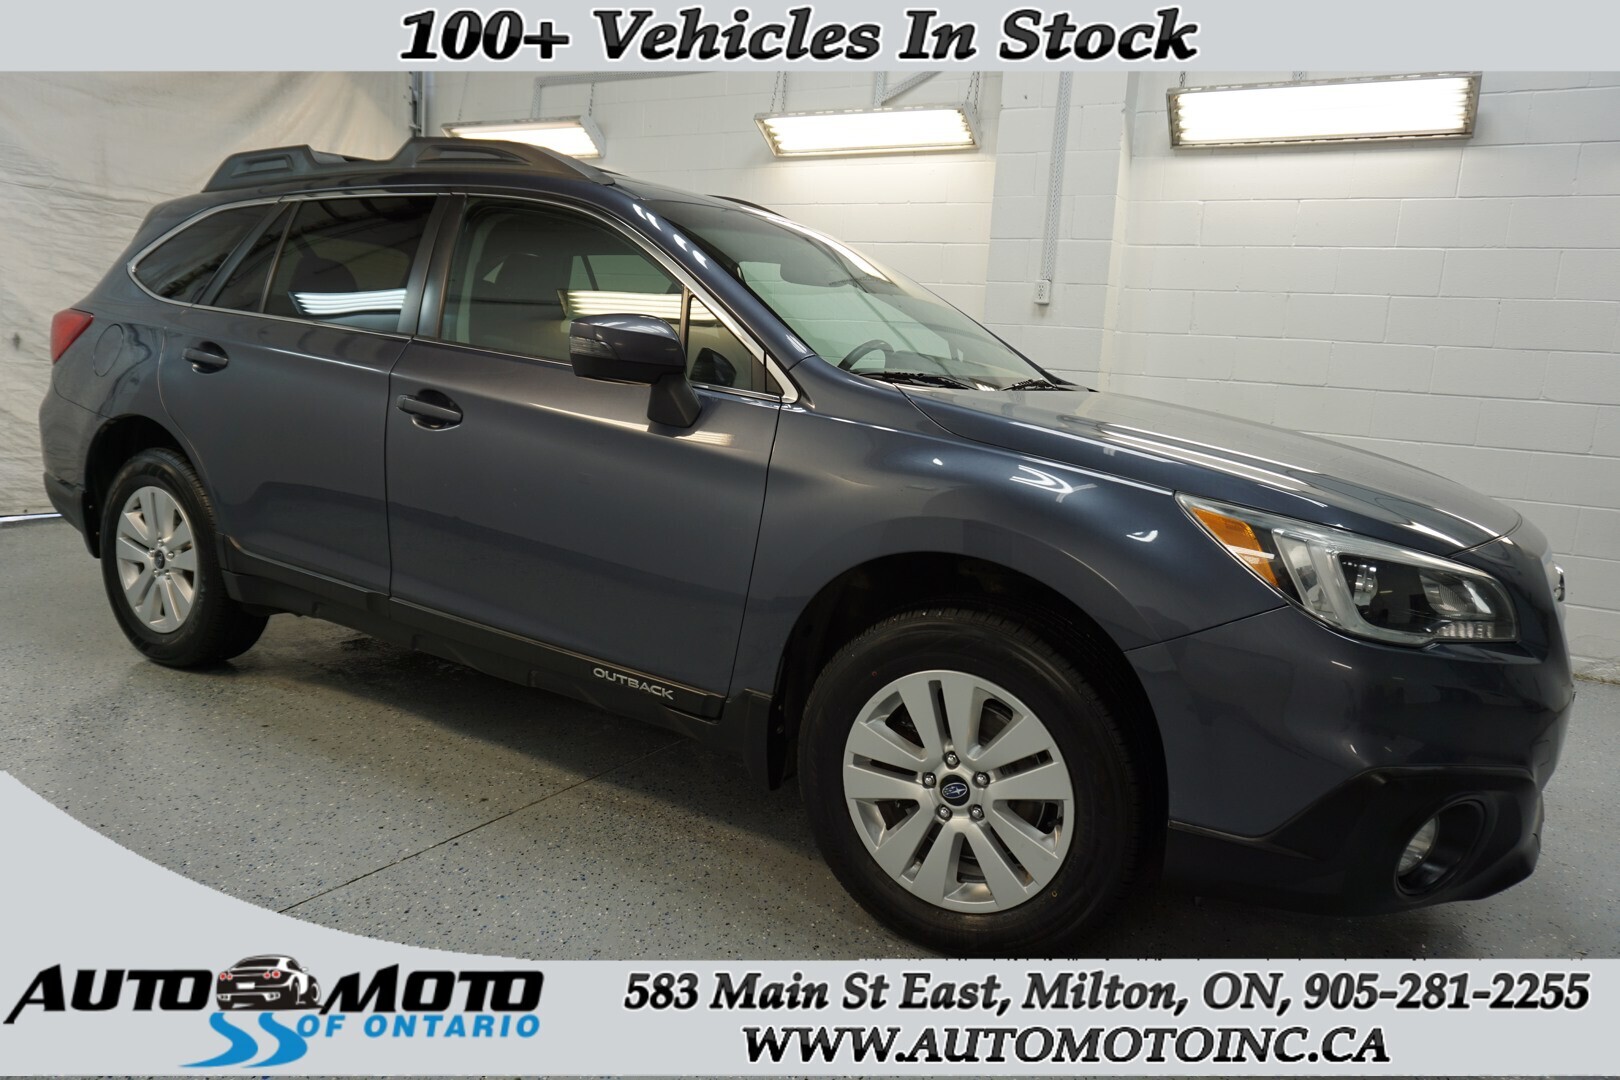 2016 Subaru Outback AWD 3.6R TOURING CERTIFIED *FREE ACCIDENT* CAMERA 